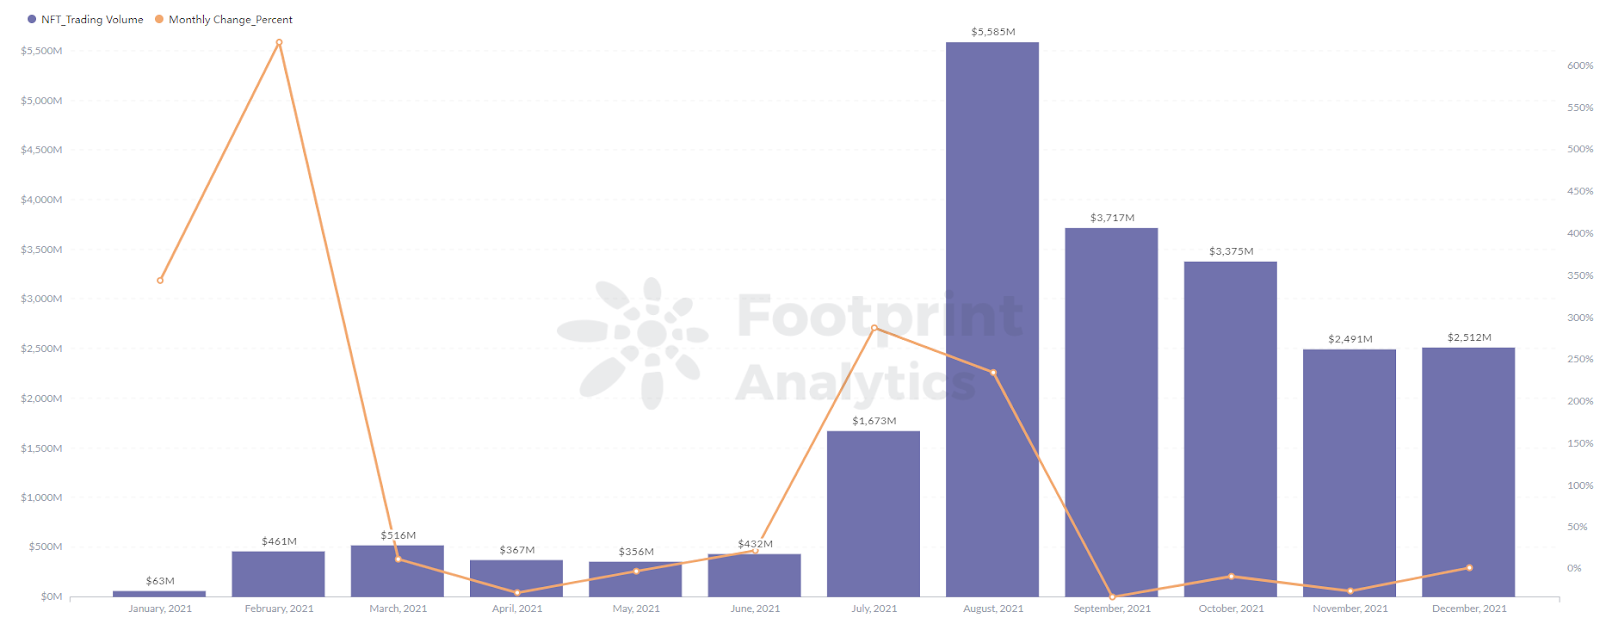 Footprint Analytics - NFT Projects' Trading Volume Peaked at 5,586 Million in August